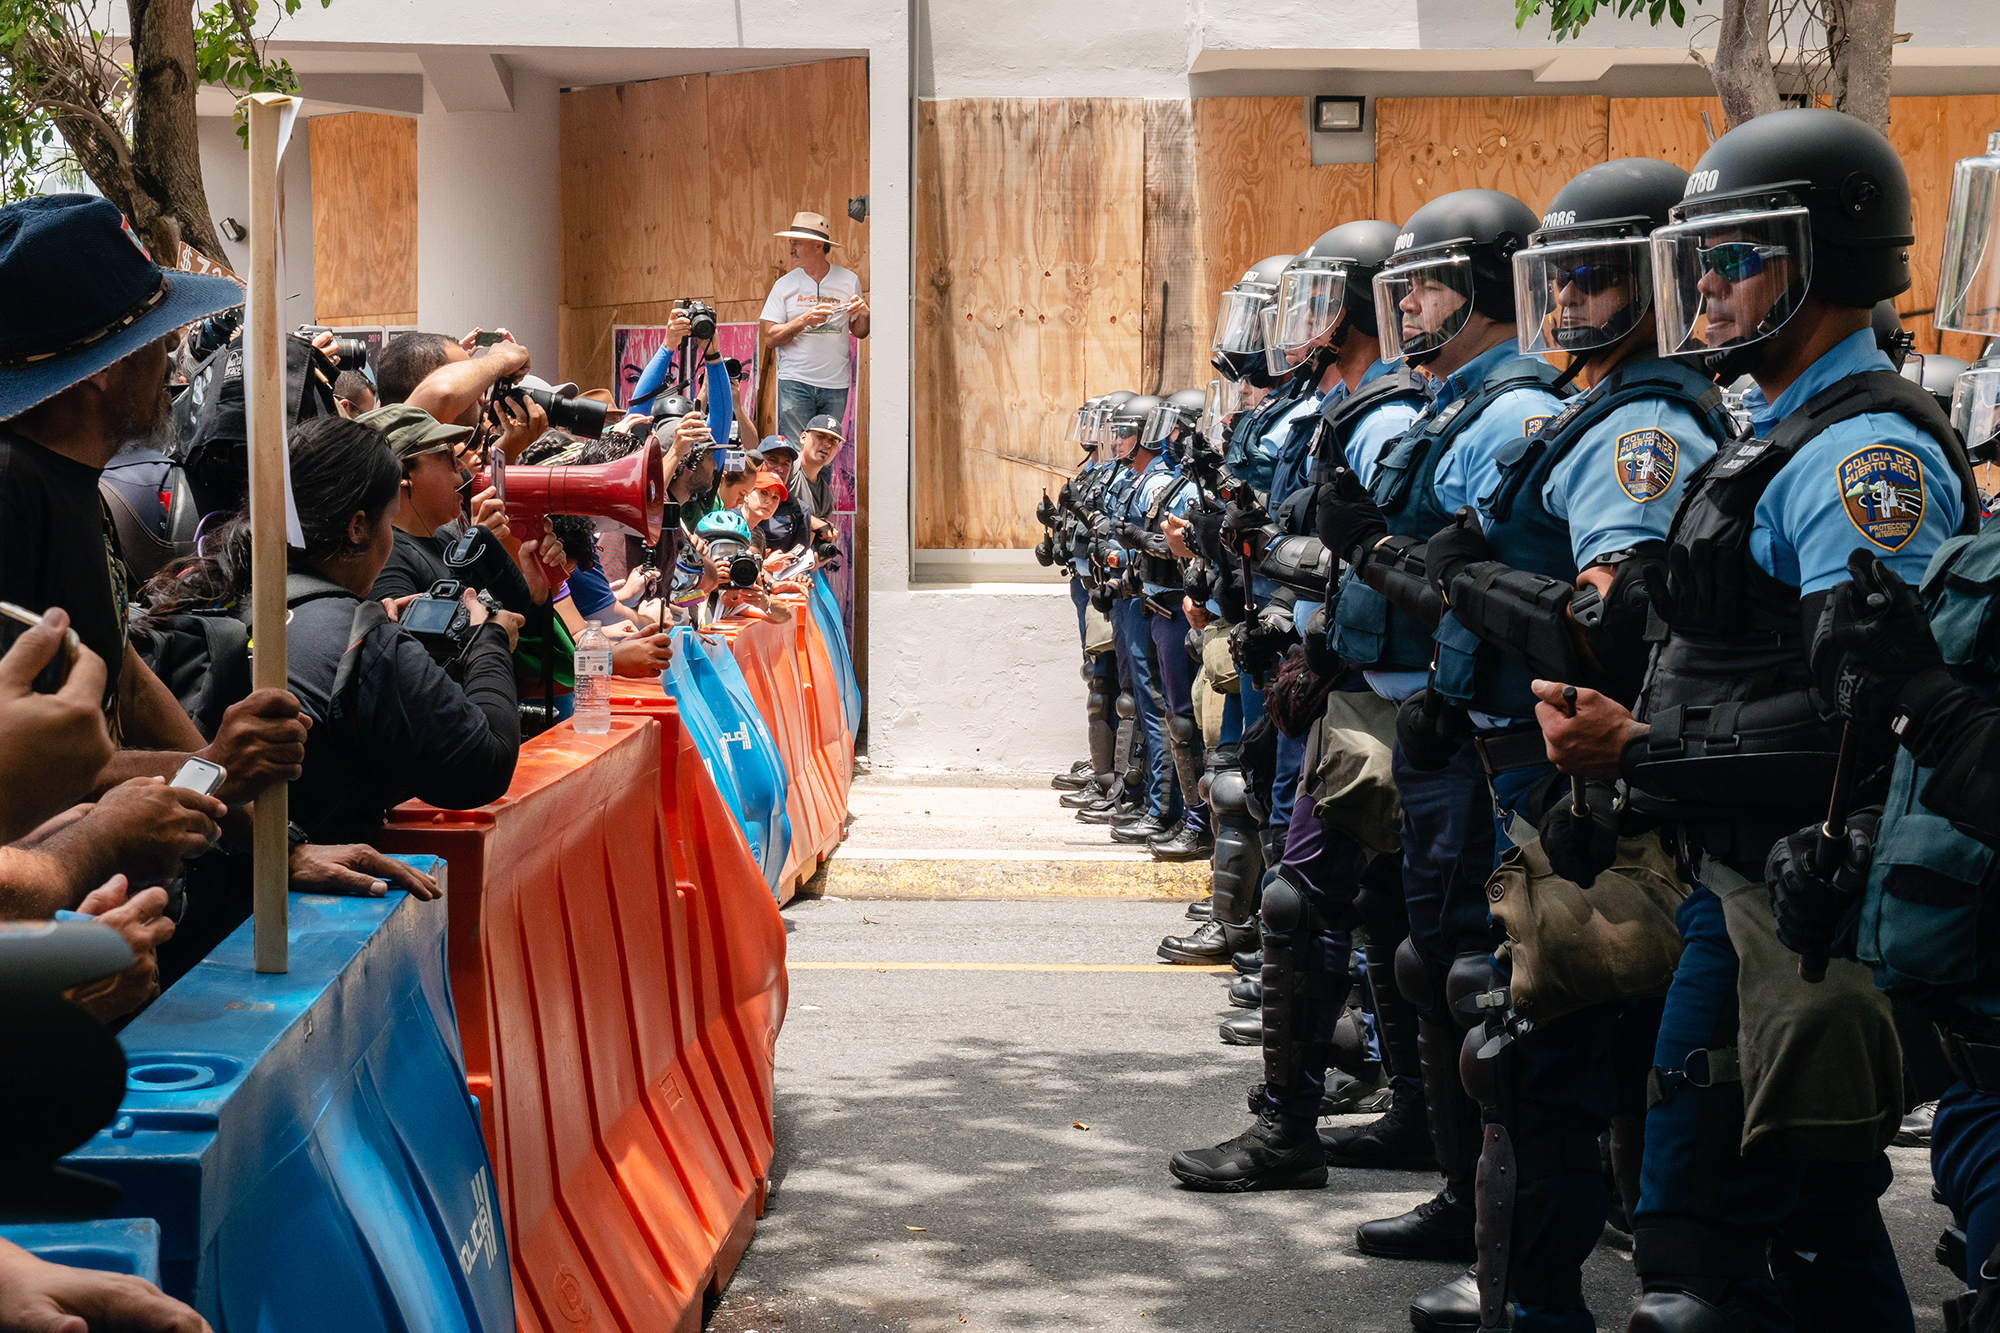 protesters standoff against police in Puerto Rico